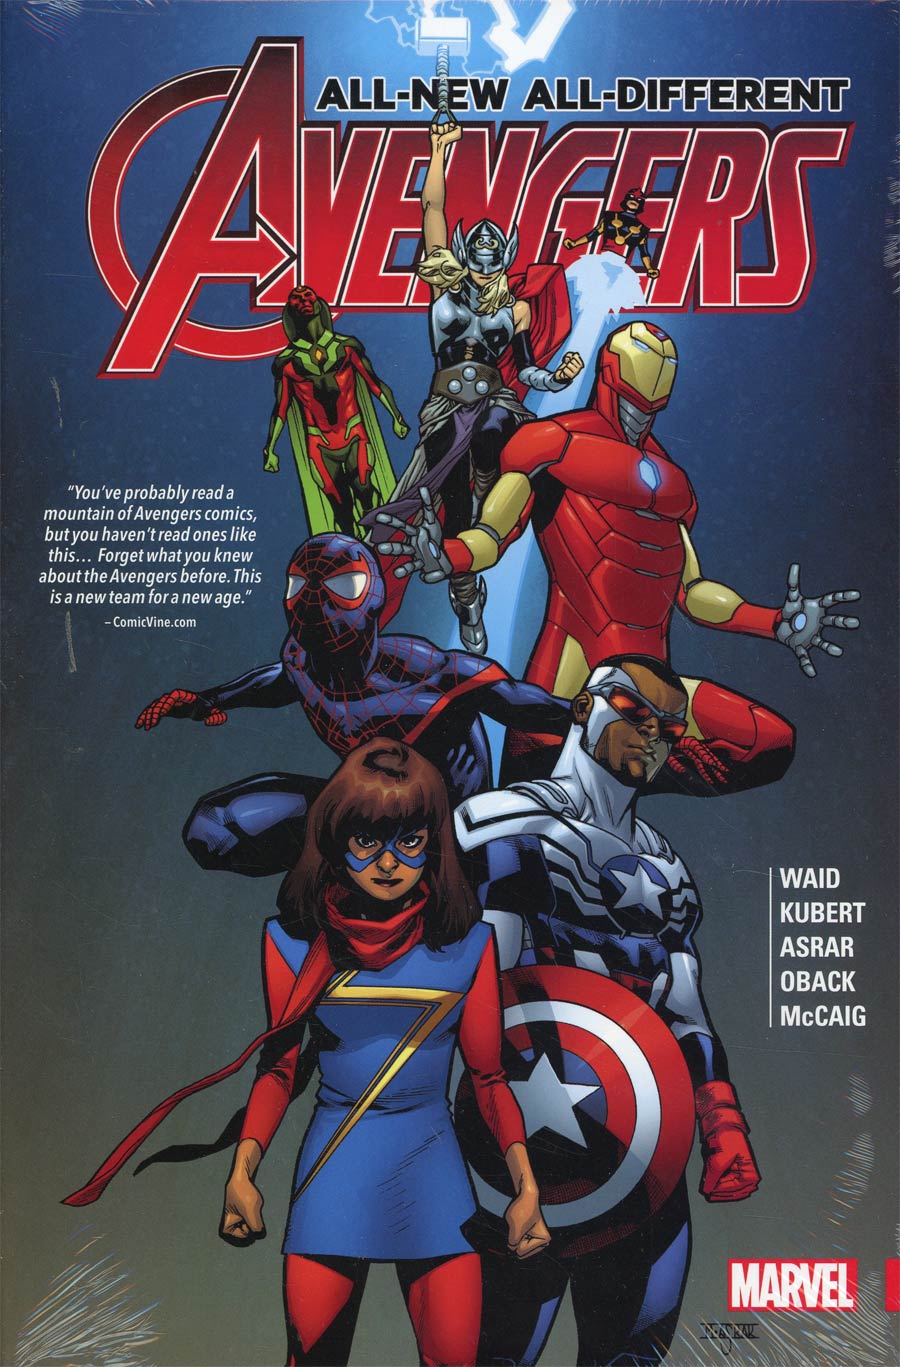 All-New All-Different Avengers Vol 1 HC